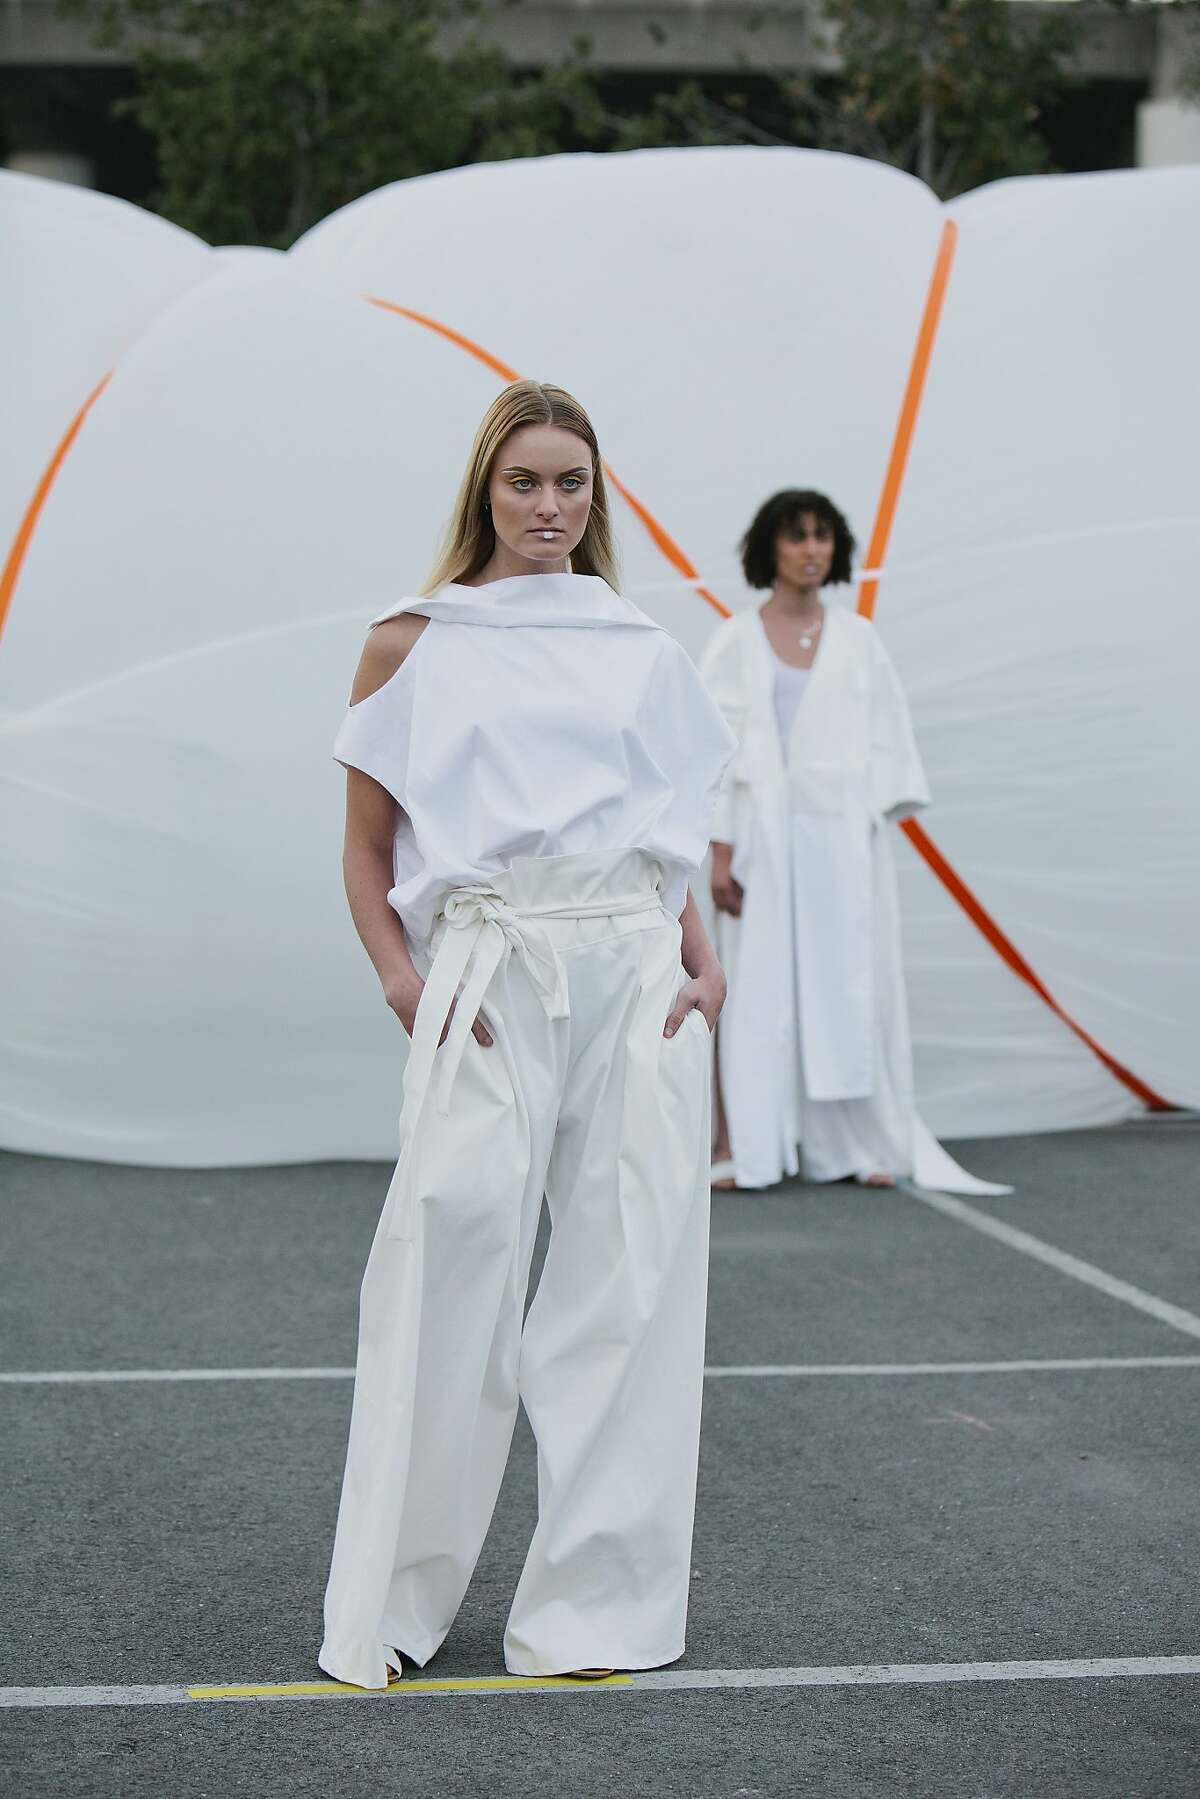 The California College of the Arts show took place on May 11 at the parking lot outside of the school, as groups of models walked among shipping containers and inflated white structures. The main themes were utility, oversize, skydiving and Burning Man-inspired shapes (Camille Malland, Eliza Oakley) and athleisure (Aigne French, Steralda Osias); cuts were relaxed, sleeves long and hems irregular and frayed. Slouchy coats and combat jackets, striking white, pops of neon and of-the-moment cinched �paper bag� pants were recurring items, and sturdy everyday fabrics like fleece, wool and cotton dominated.